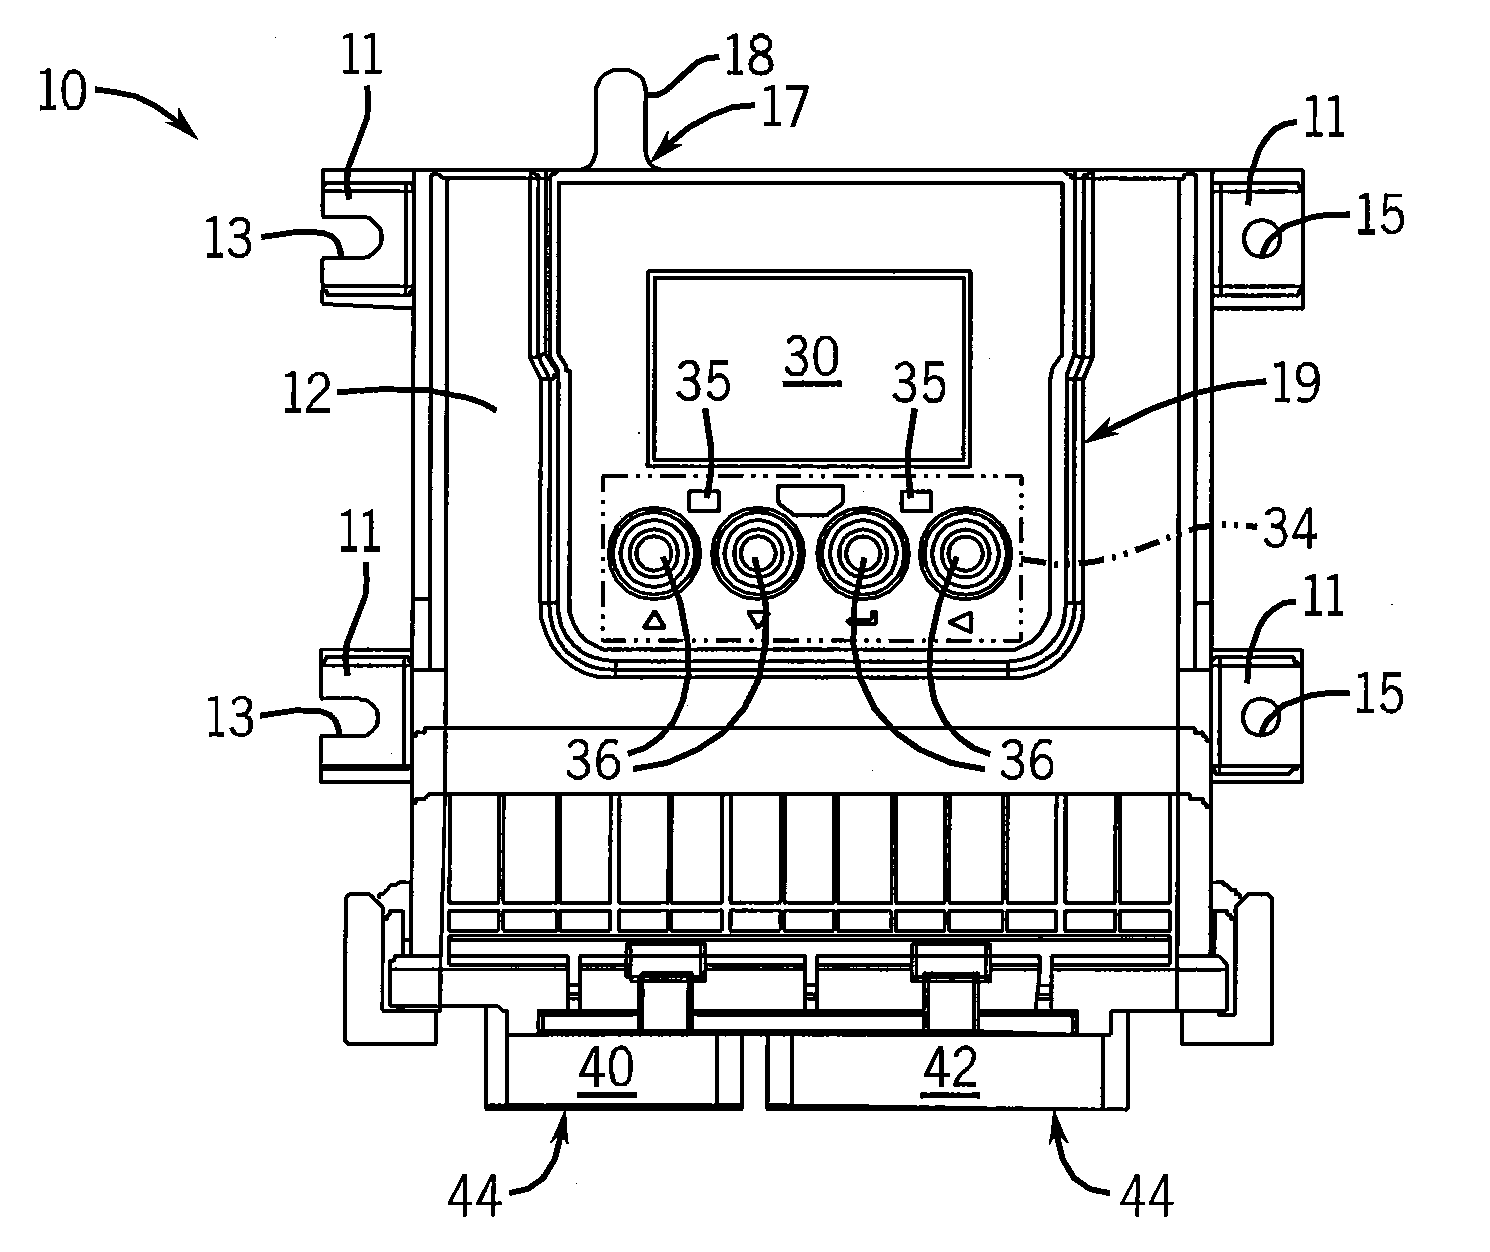 System for Control of Mobile Hydraulic Equipment